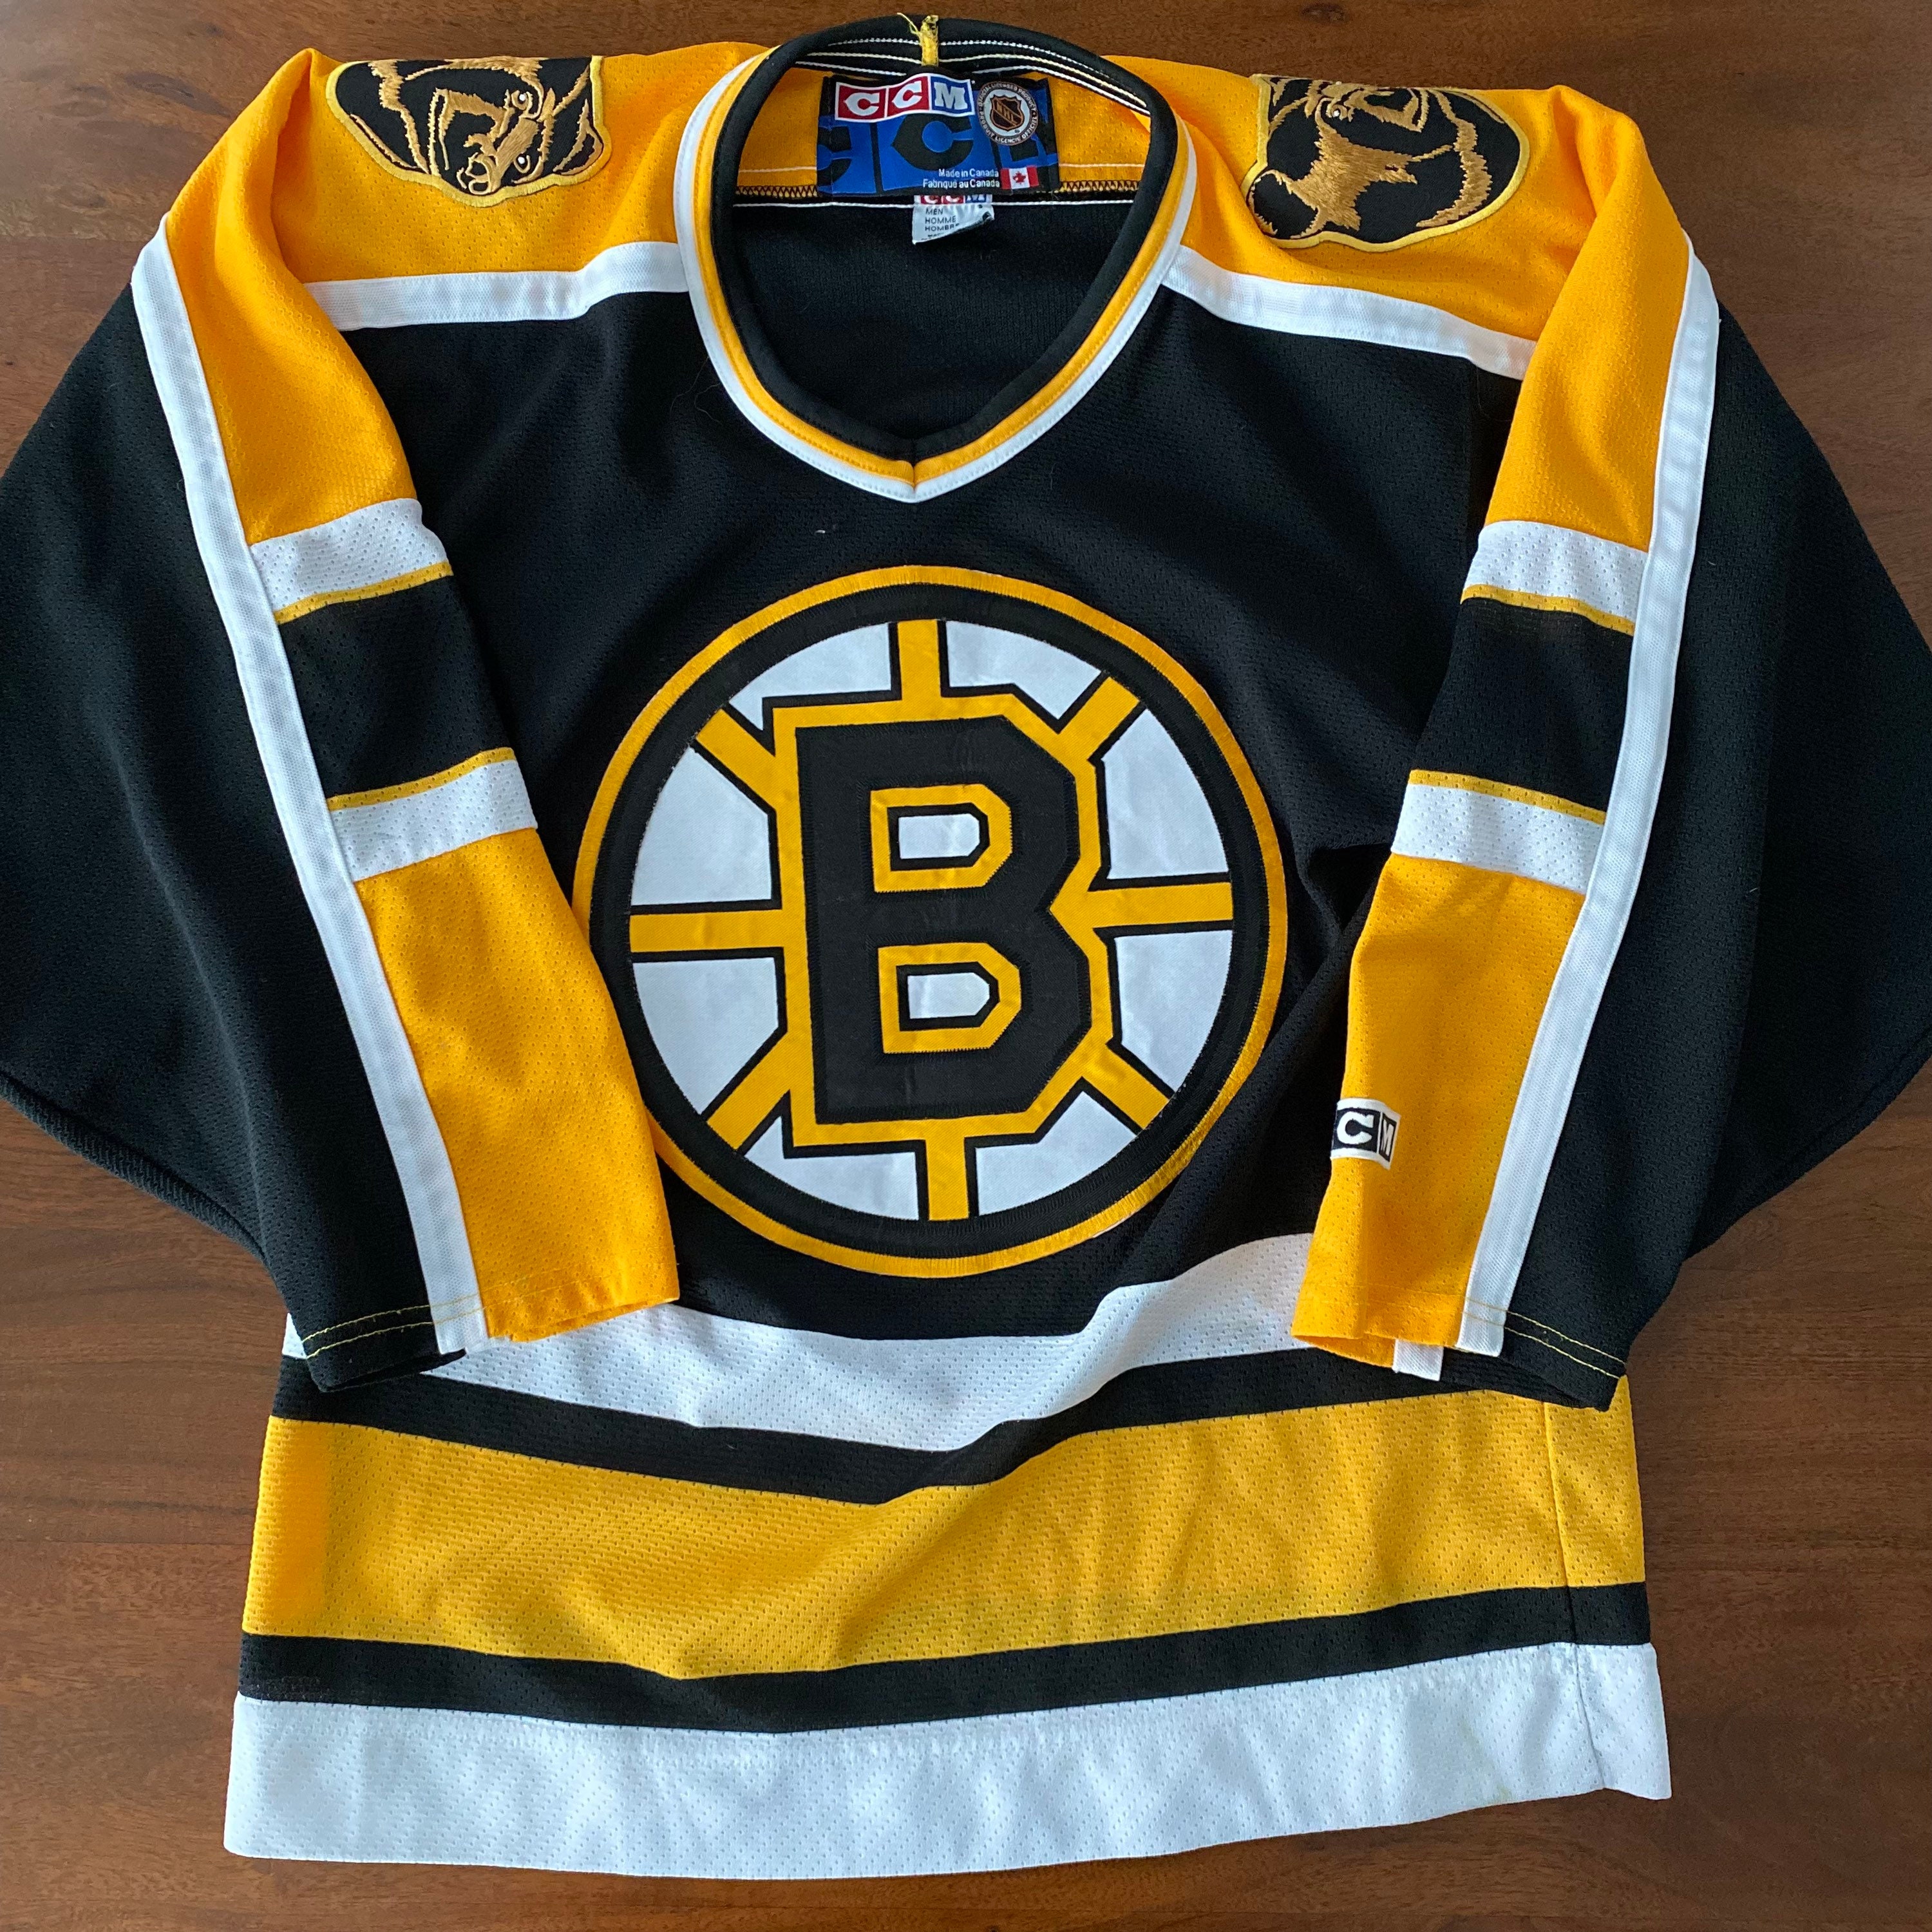 Authentic Boston Bruins Jersey 52 CCM Early 90s